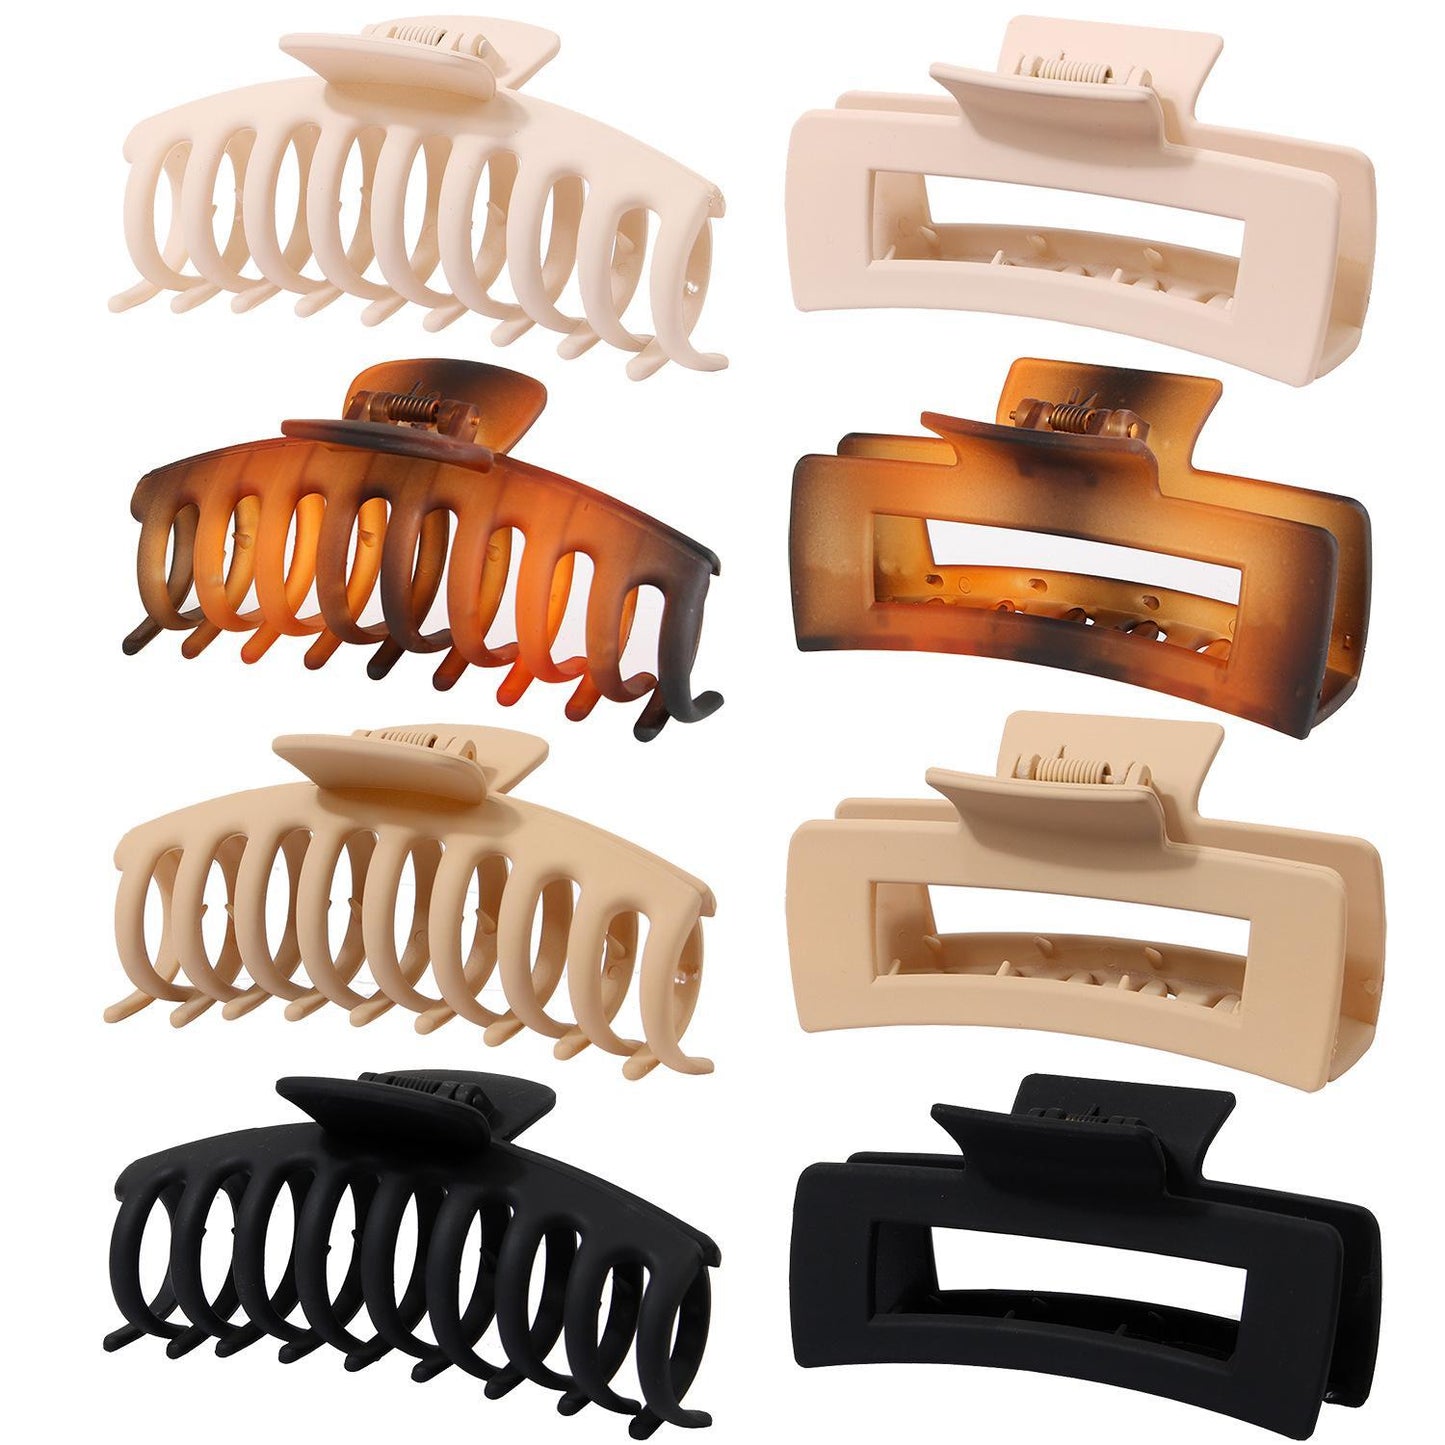 New Fashion Hair Clips for Women 4.3 Inch Large Hair Claw Clips for Women Thin Thick Curly Hair, Big Matte Banana Clips,Strong Hold jaw clips,Neutral Colors